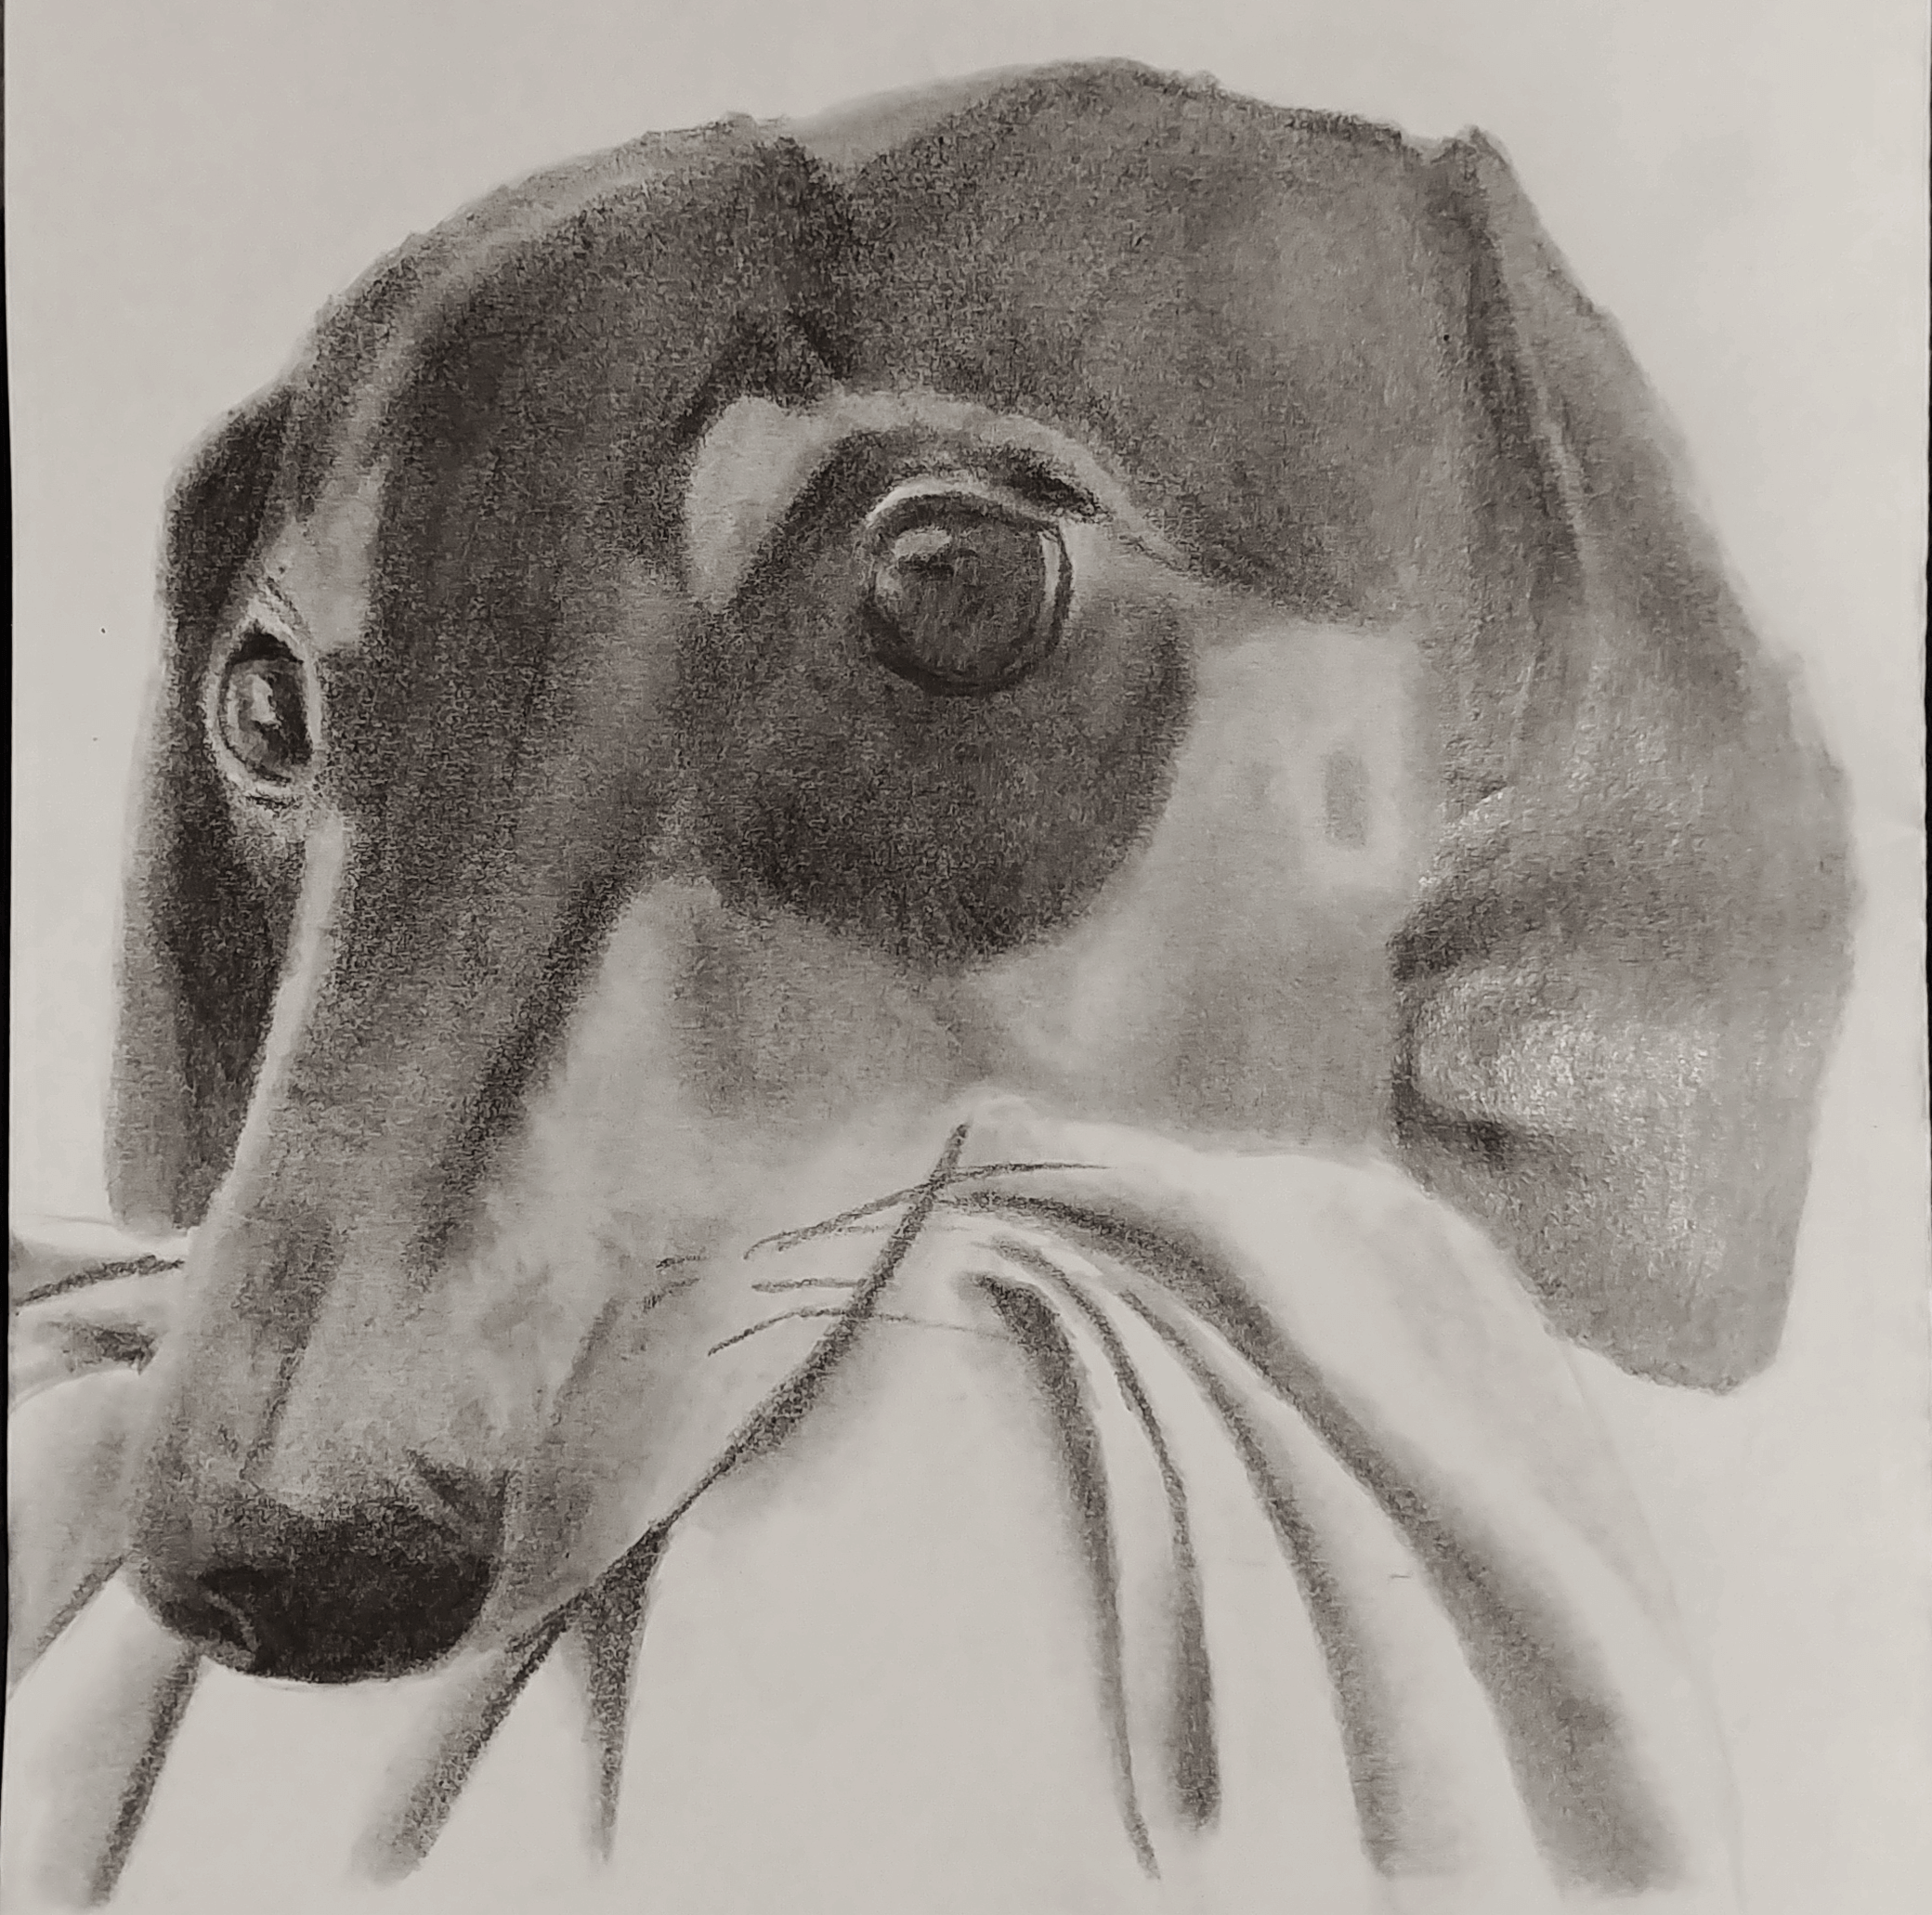 A pencil drawing of Khiron, my puppy, after he stole a blanket and refused to let it go.